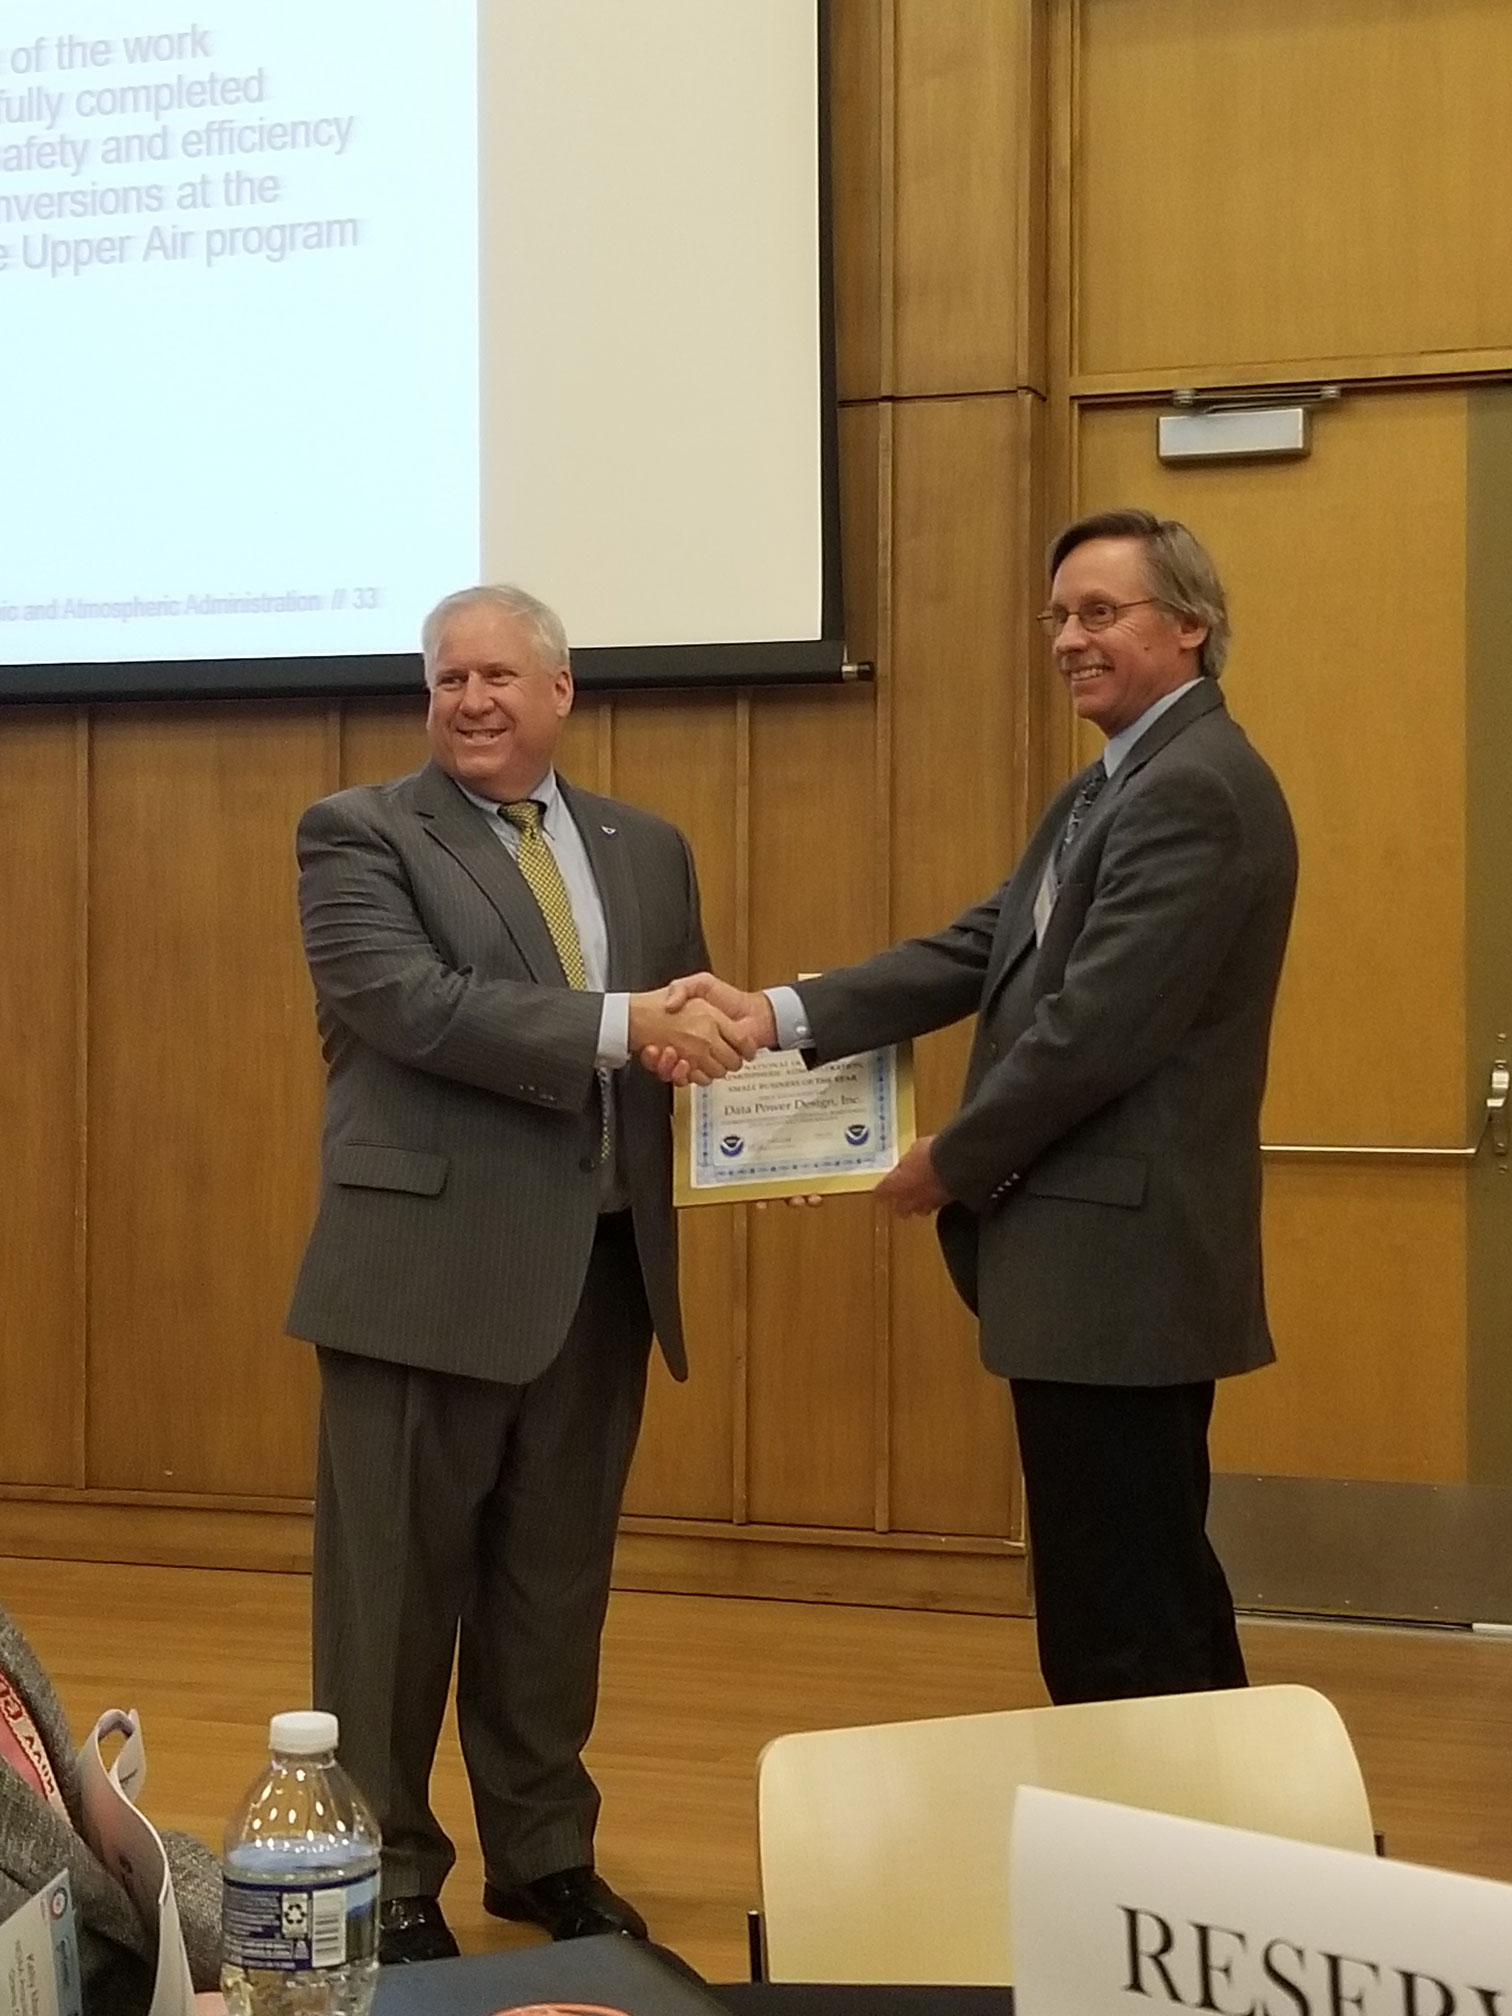 Data Power Design, Inc. (DPDI) President John Nellenback receives the Small Business of the Year Award from AGO Director Jeffrey Thomas at NOAA’s Small Business Industry Day, April 4, 2019